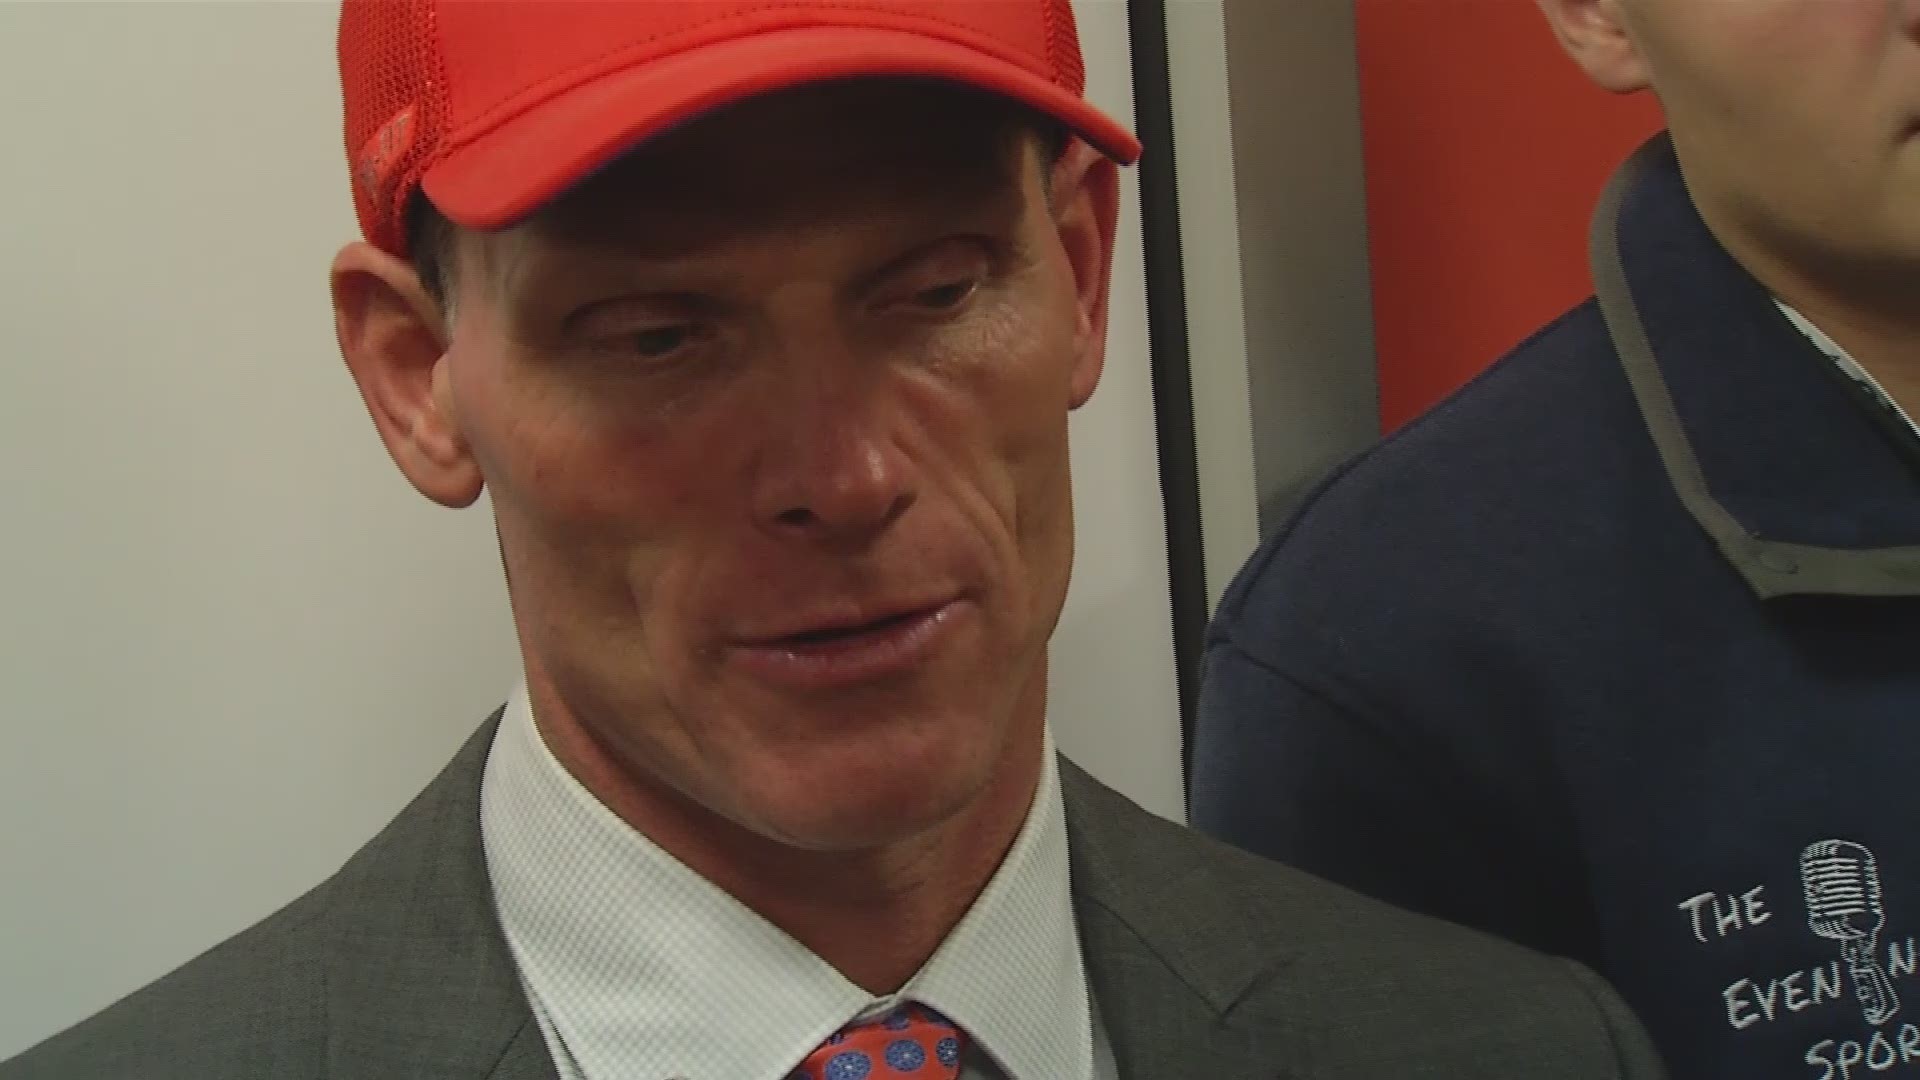 After watching USC shred his defense, Clemson defensive coordinator Brent Venables was clearly disappointed and admitted he was embarrassed by the performance.